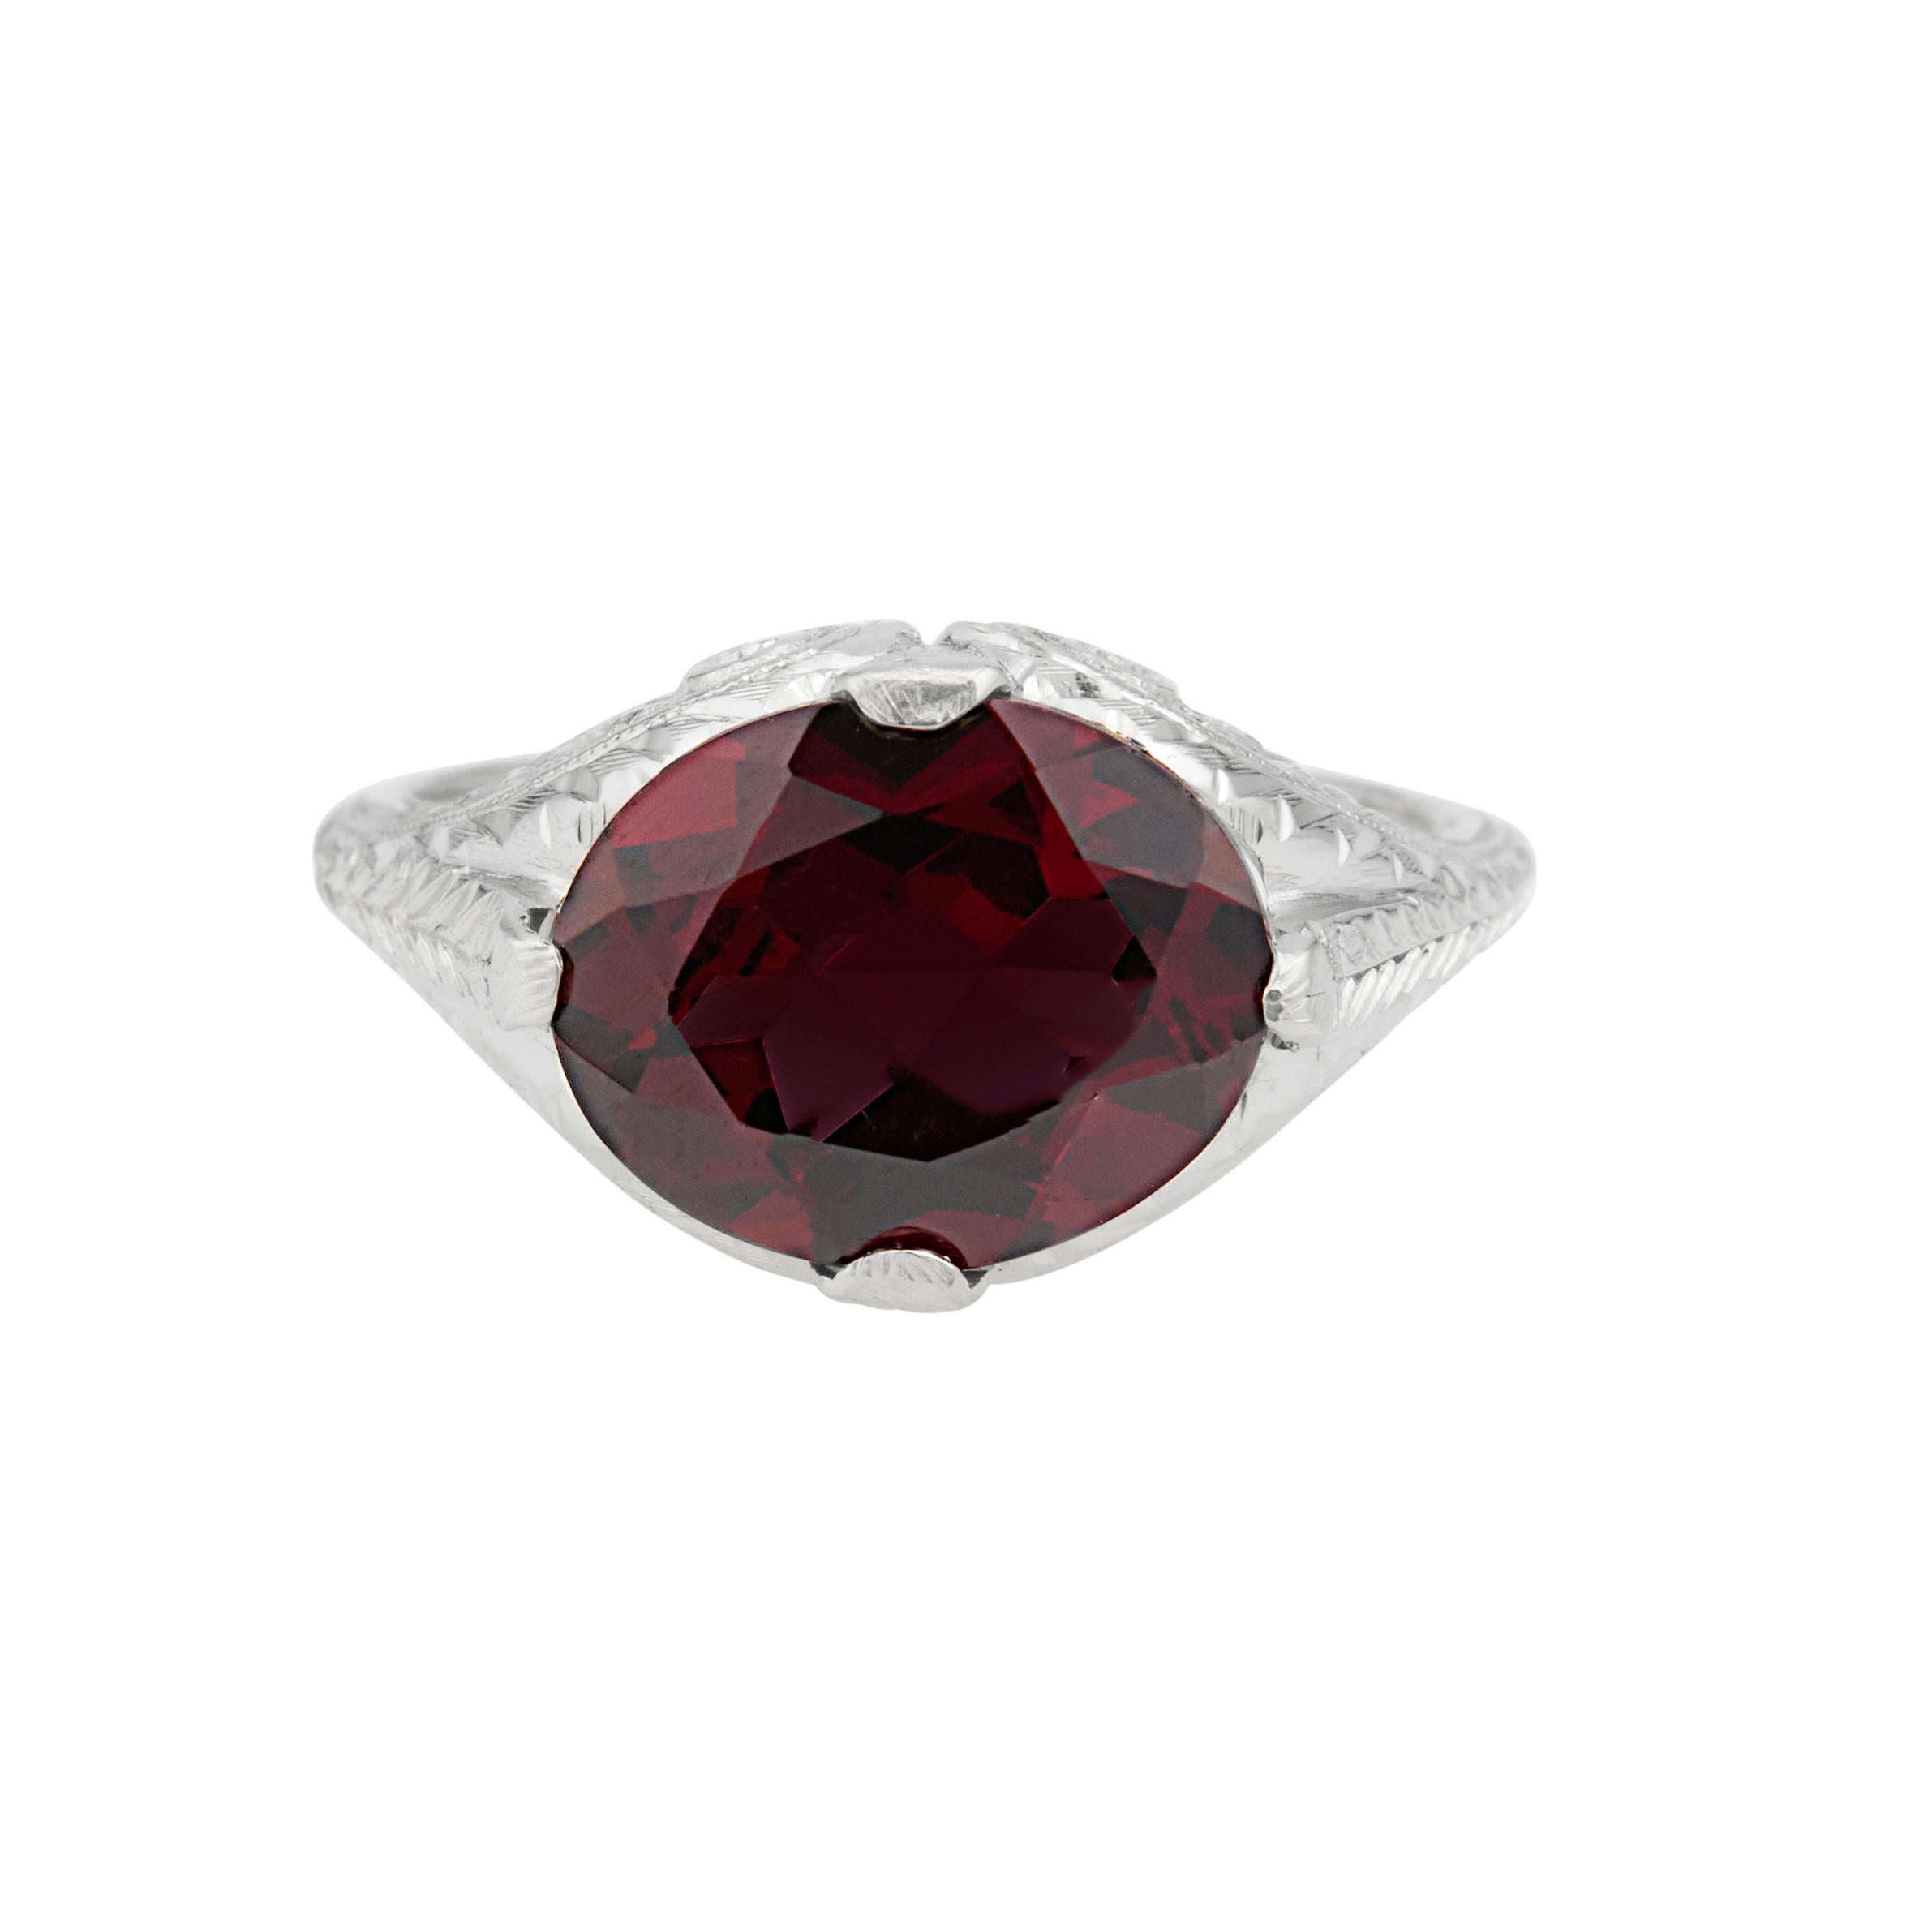 Art Deco 1930’s garnet ring. Oval center garnet set in a 14k white gold hand engraved setting. 

1 oval reddish brown Garnet, approx. total weight 3.81cts, VS, 11 x 9mm
Size: 5.25 and sizable
14k white gold
Tested and stamped: 14k
3.8 grams
Width at